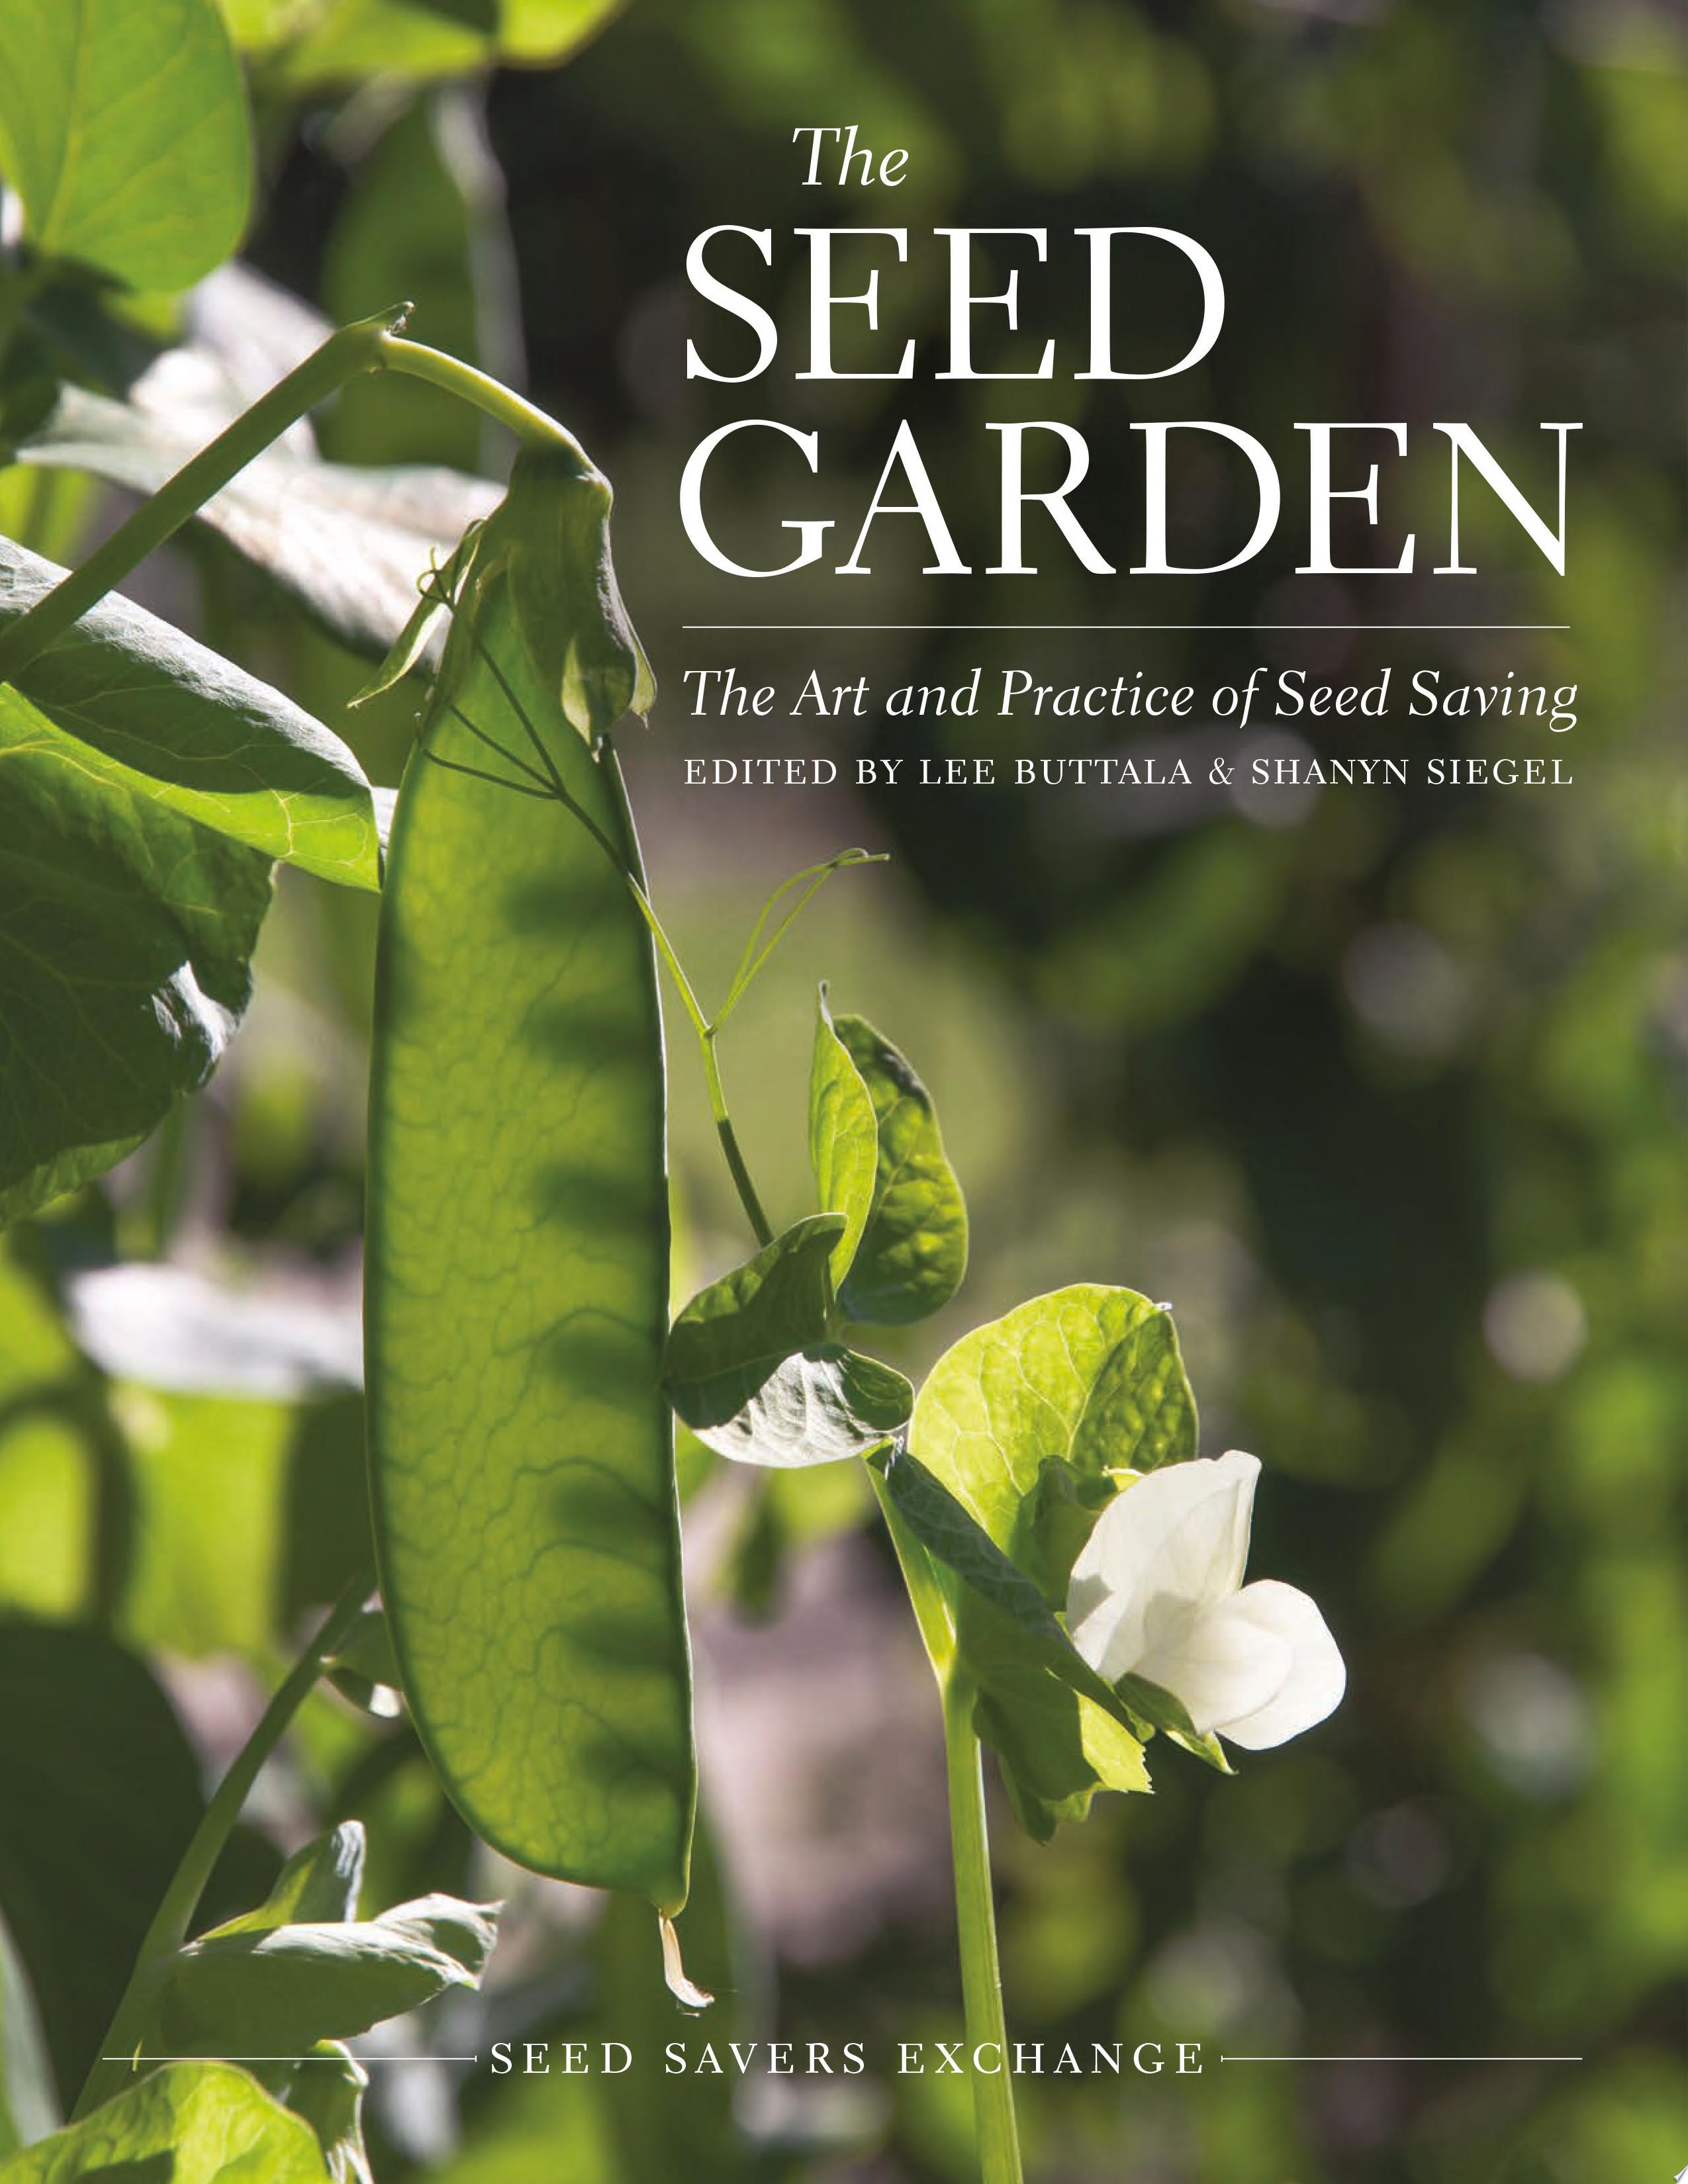 Image for "The Seed Garden: the art and practice of seed saving"